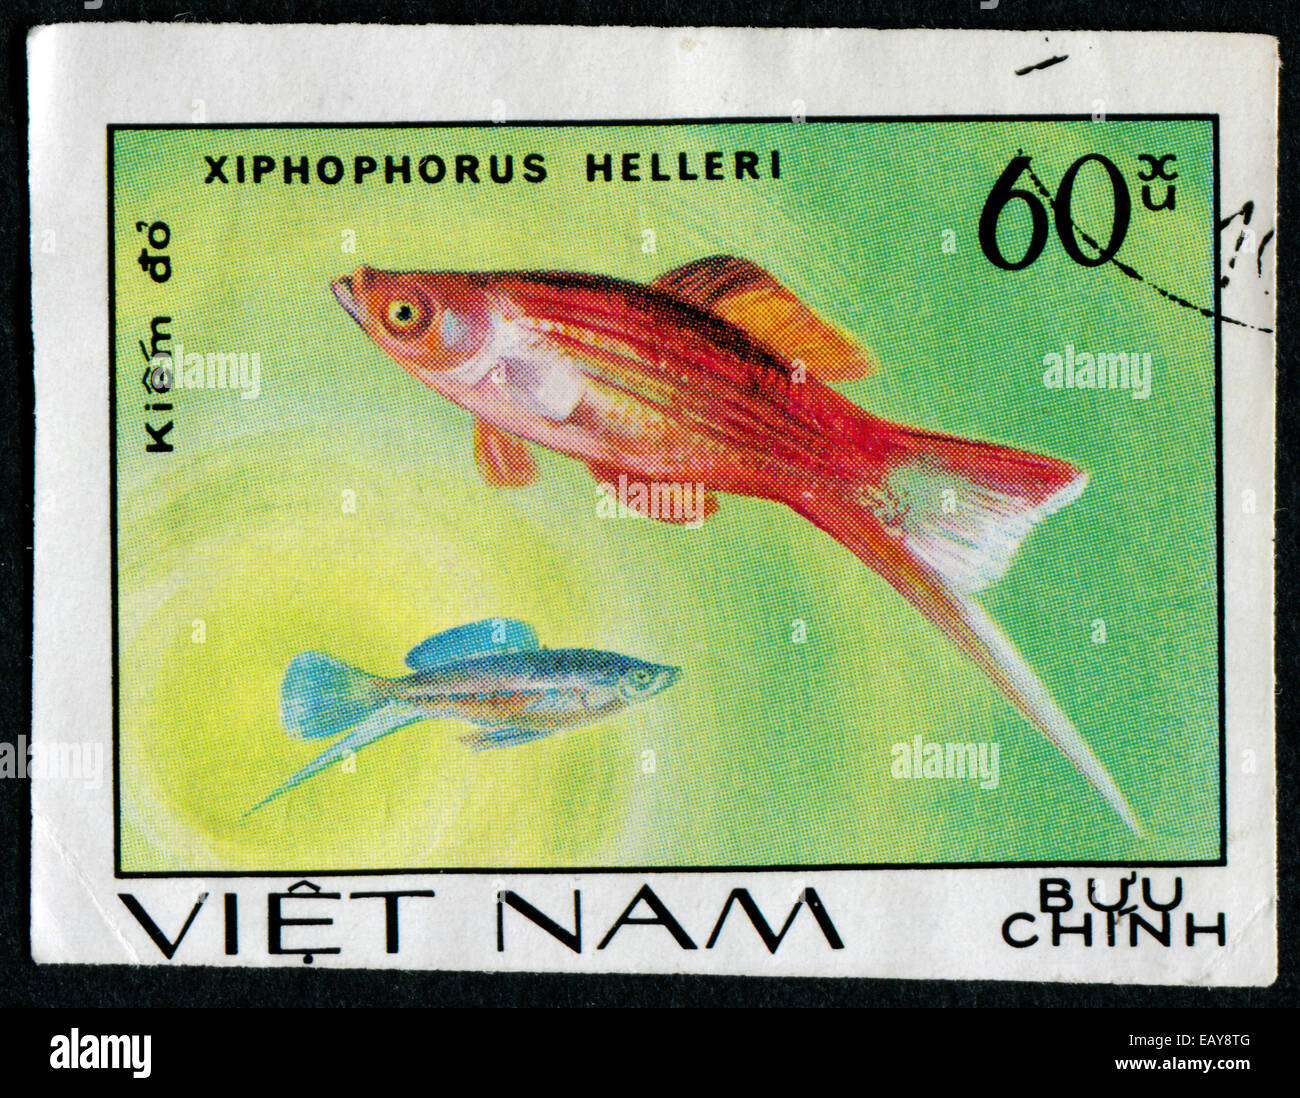 VIETNAM - CIRCA 1980: A stamp printed by Vietnam shows fish Xiphophorus helleri, stamp is from the series, circa 1980 Stock Photo